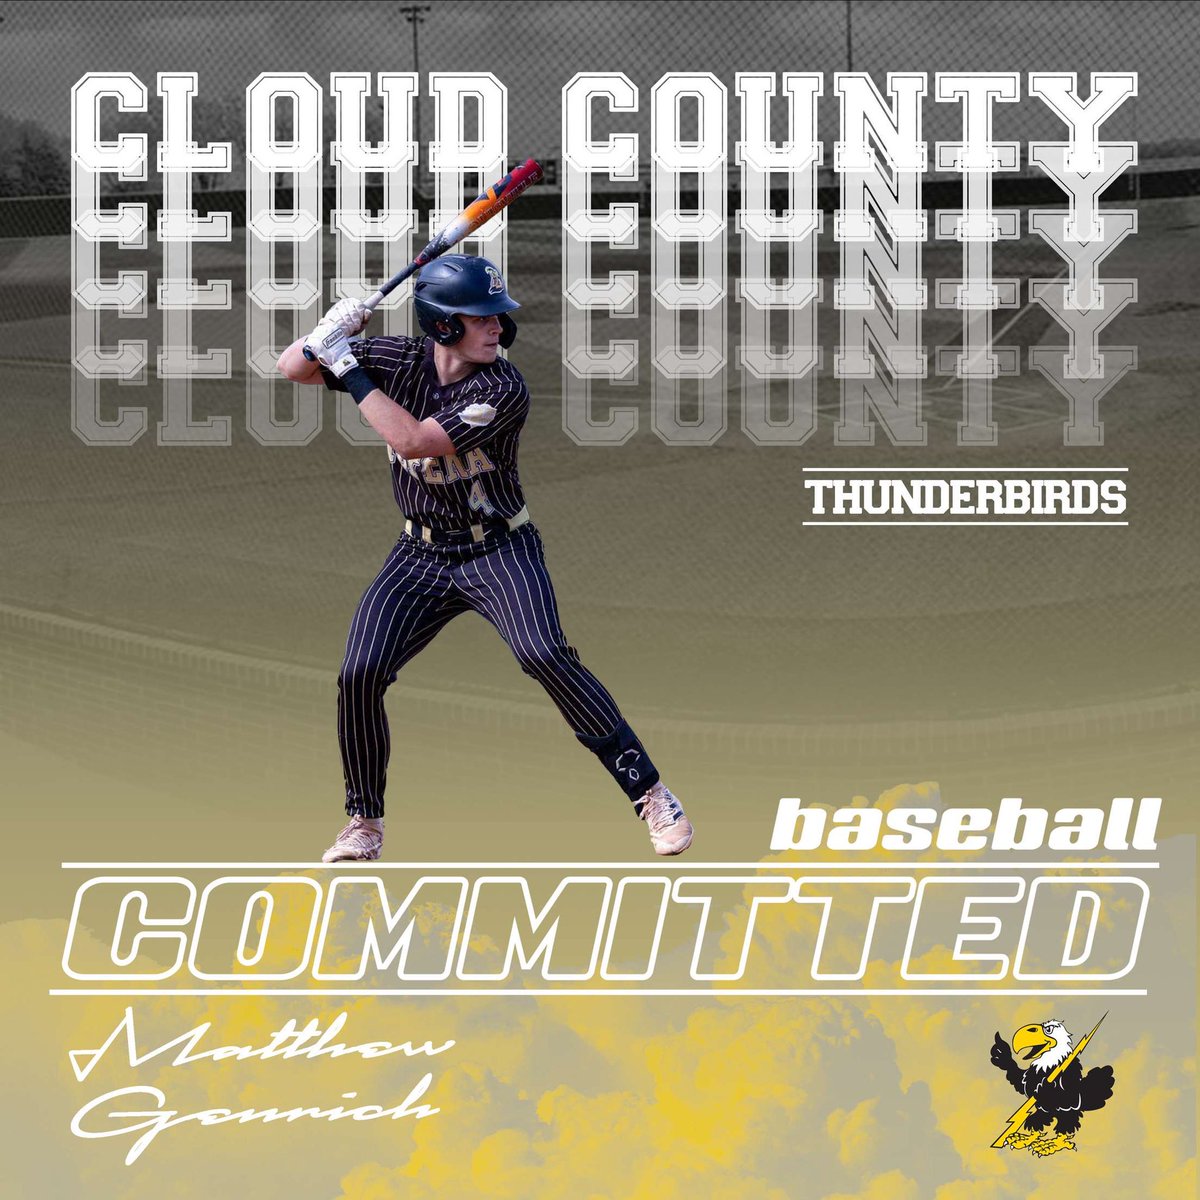 I’m excited to announce that I will be continuing my academic and baseball career at Cloud County Community College. Huge thanks to my family, teammates, friends, and coaches for helping me along the way! #dirtybird⚡️🦅